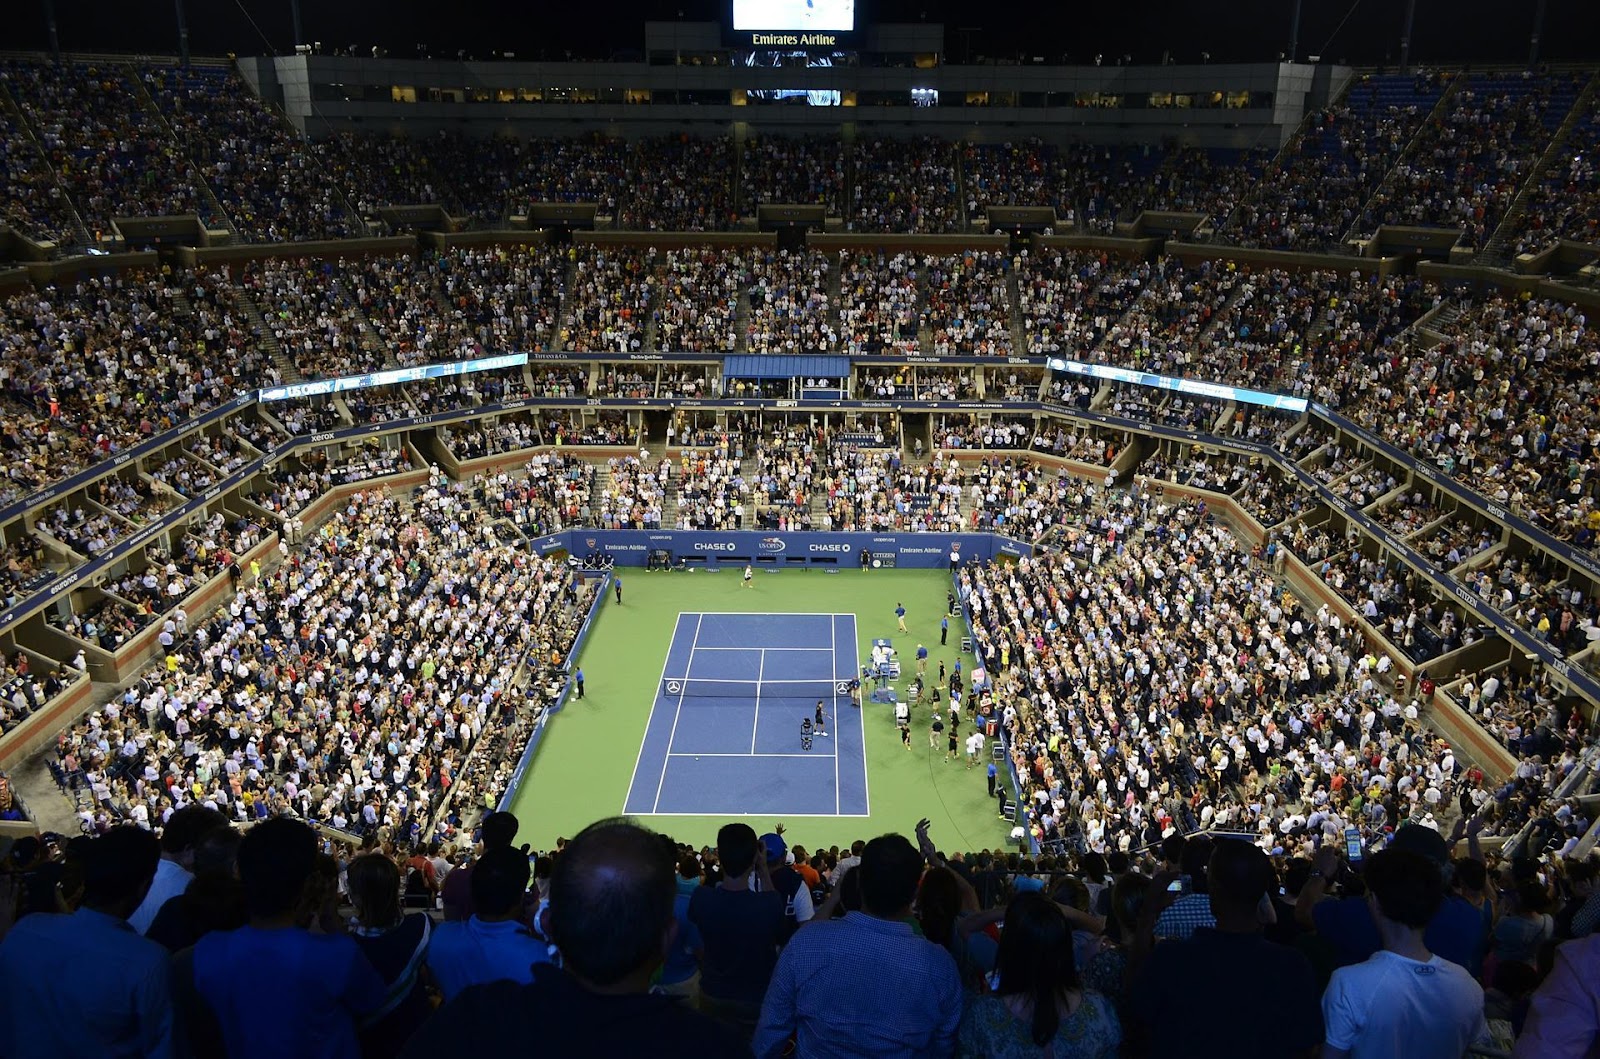 US Open 2022: History, Schedule, Favorites, and Every Other Thing You Should Know